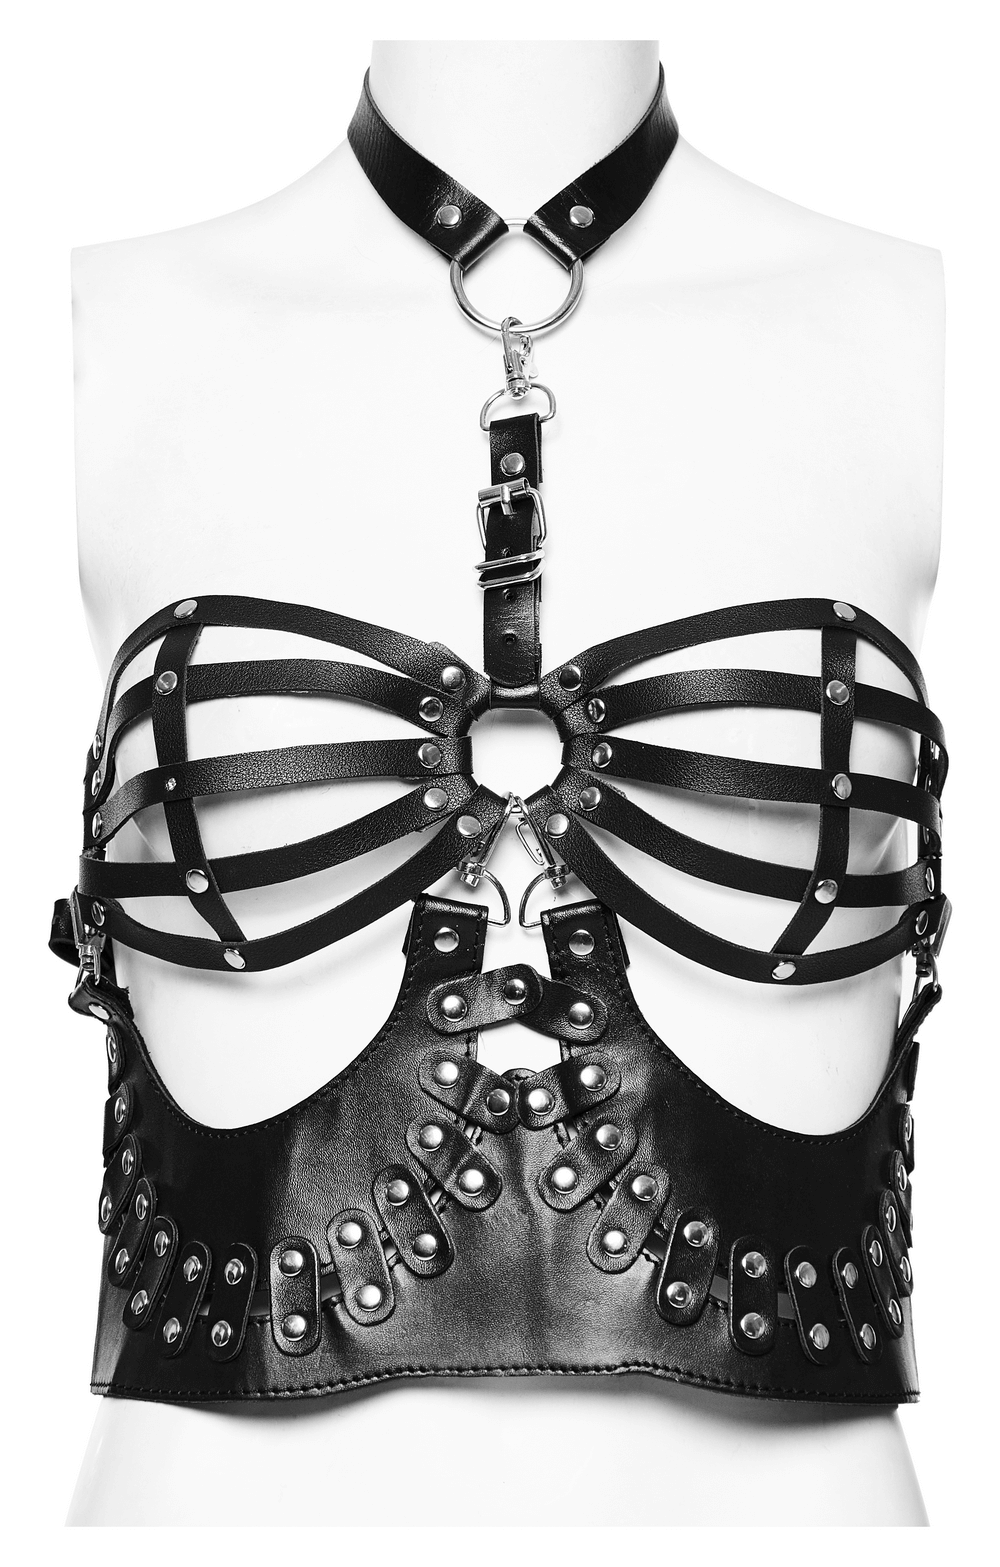 Sexy Faux Leather Gothic Strapped Bustier Top